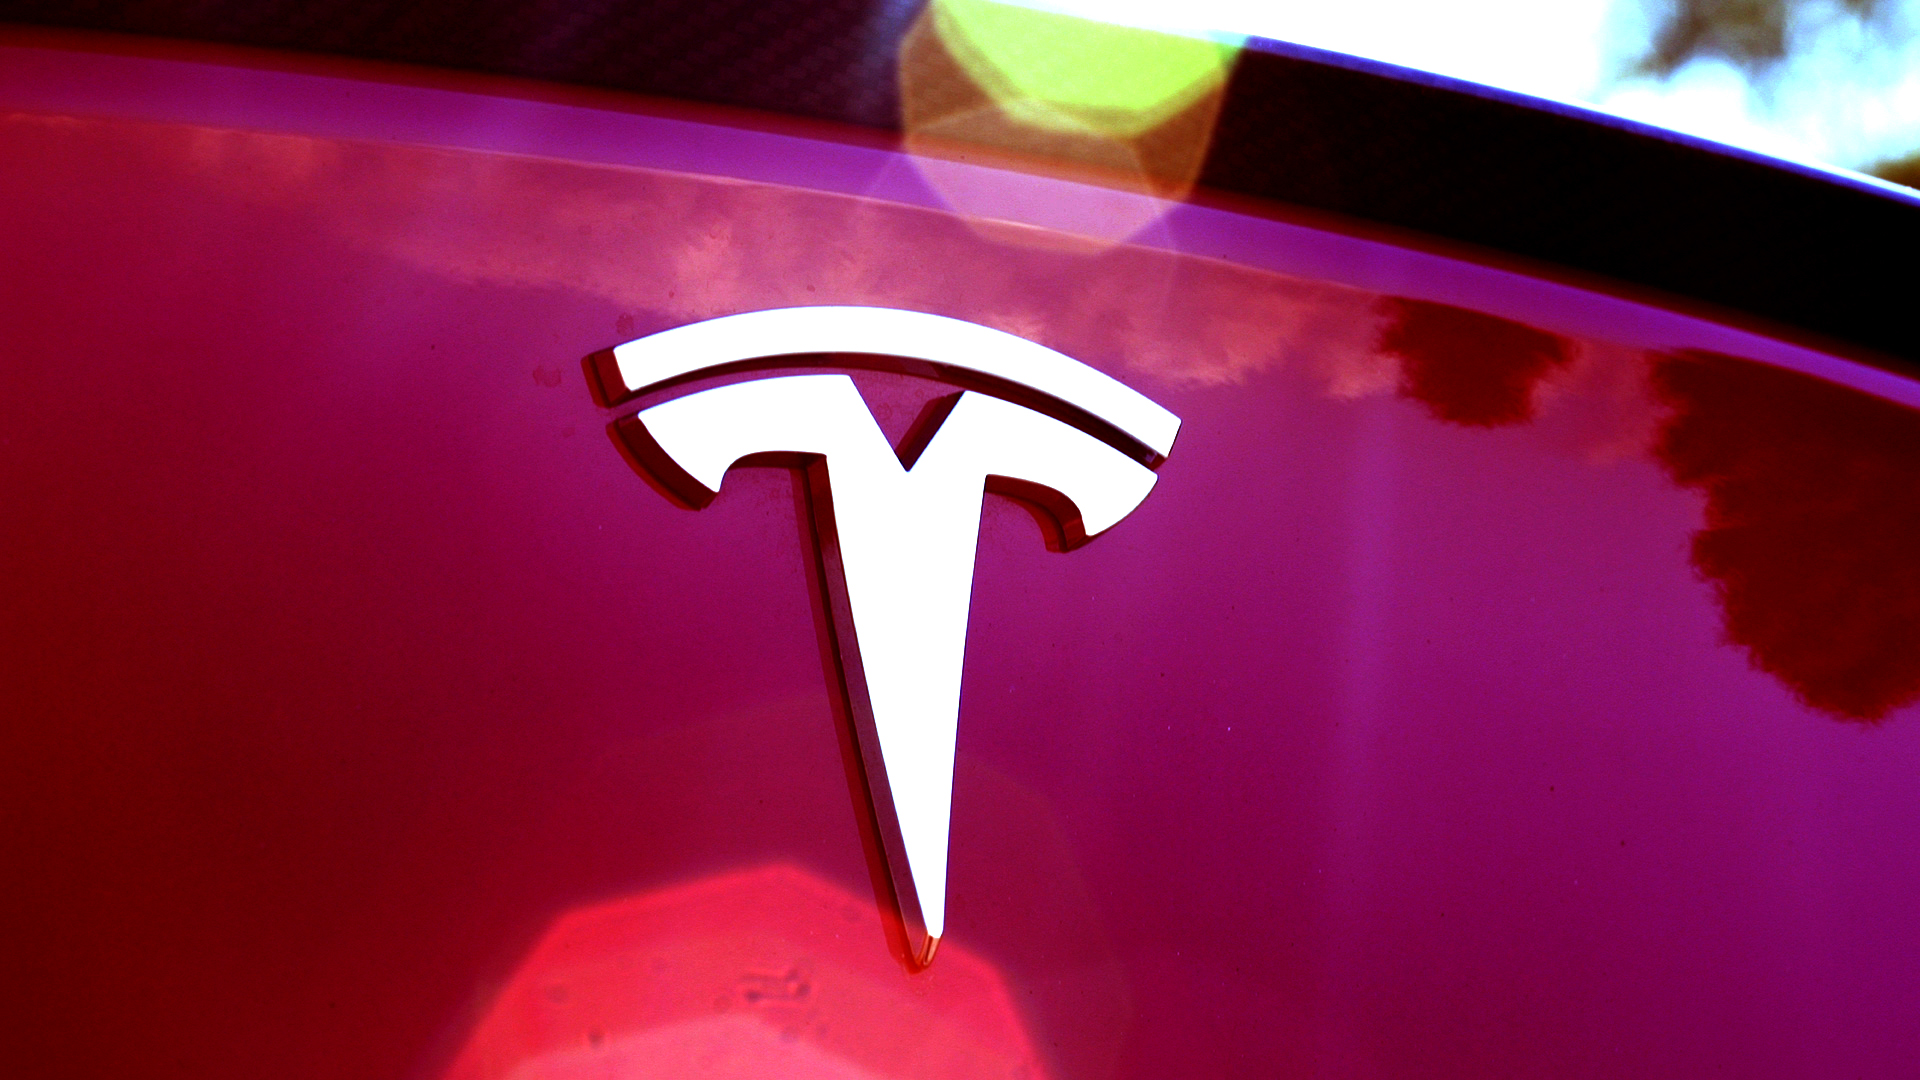 Elon Musk: Tesla Model S Can Be Used Like A Boat For “Short Periods Of Time”